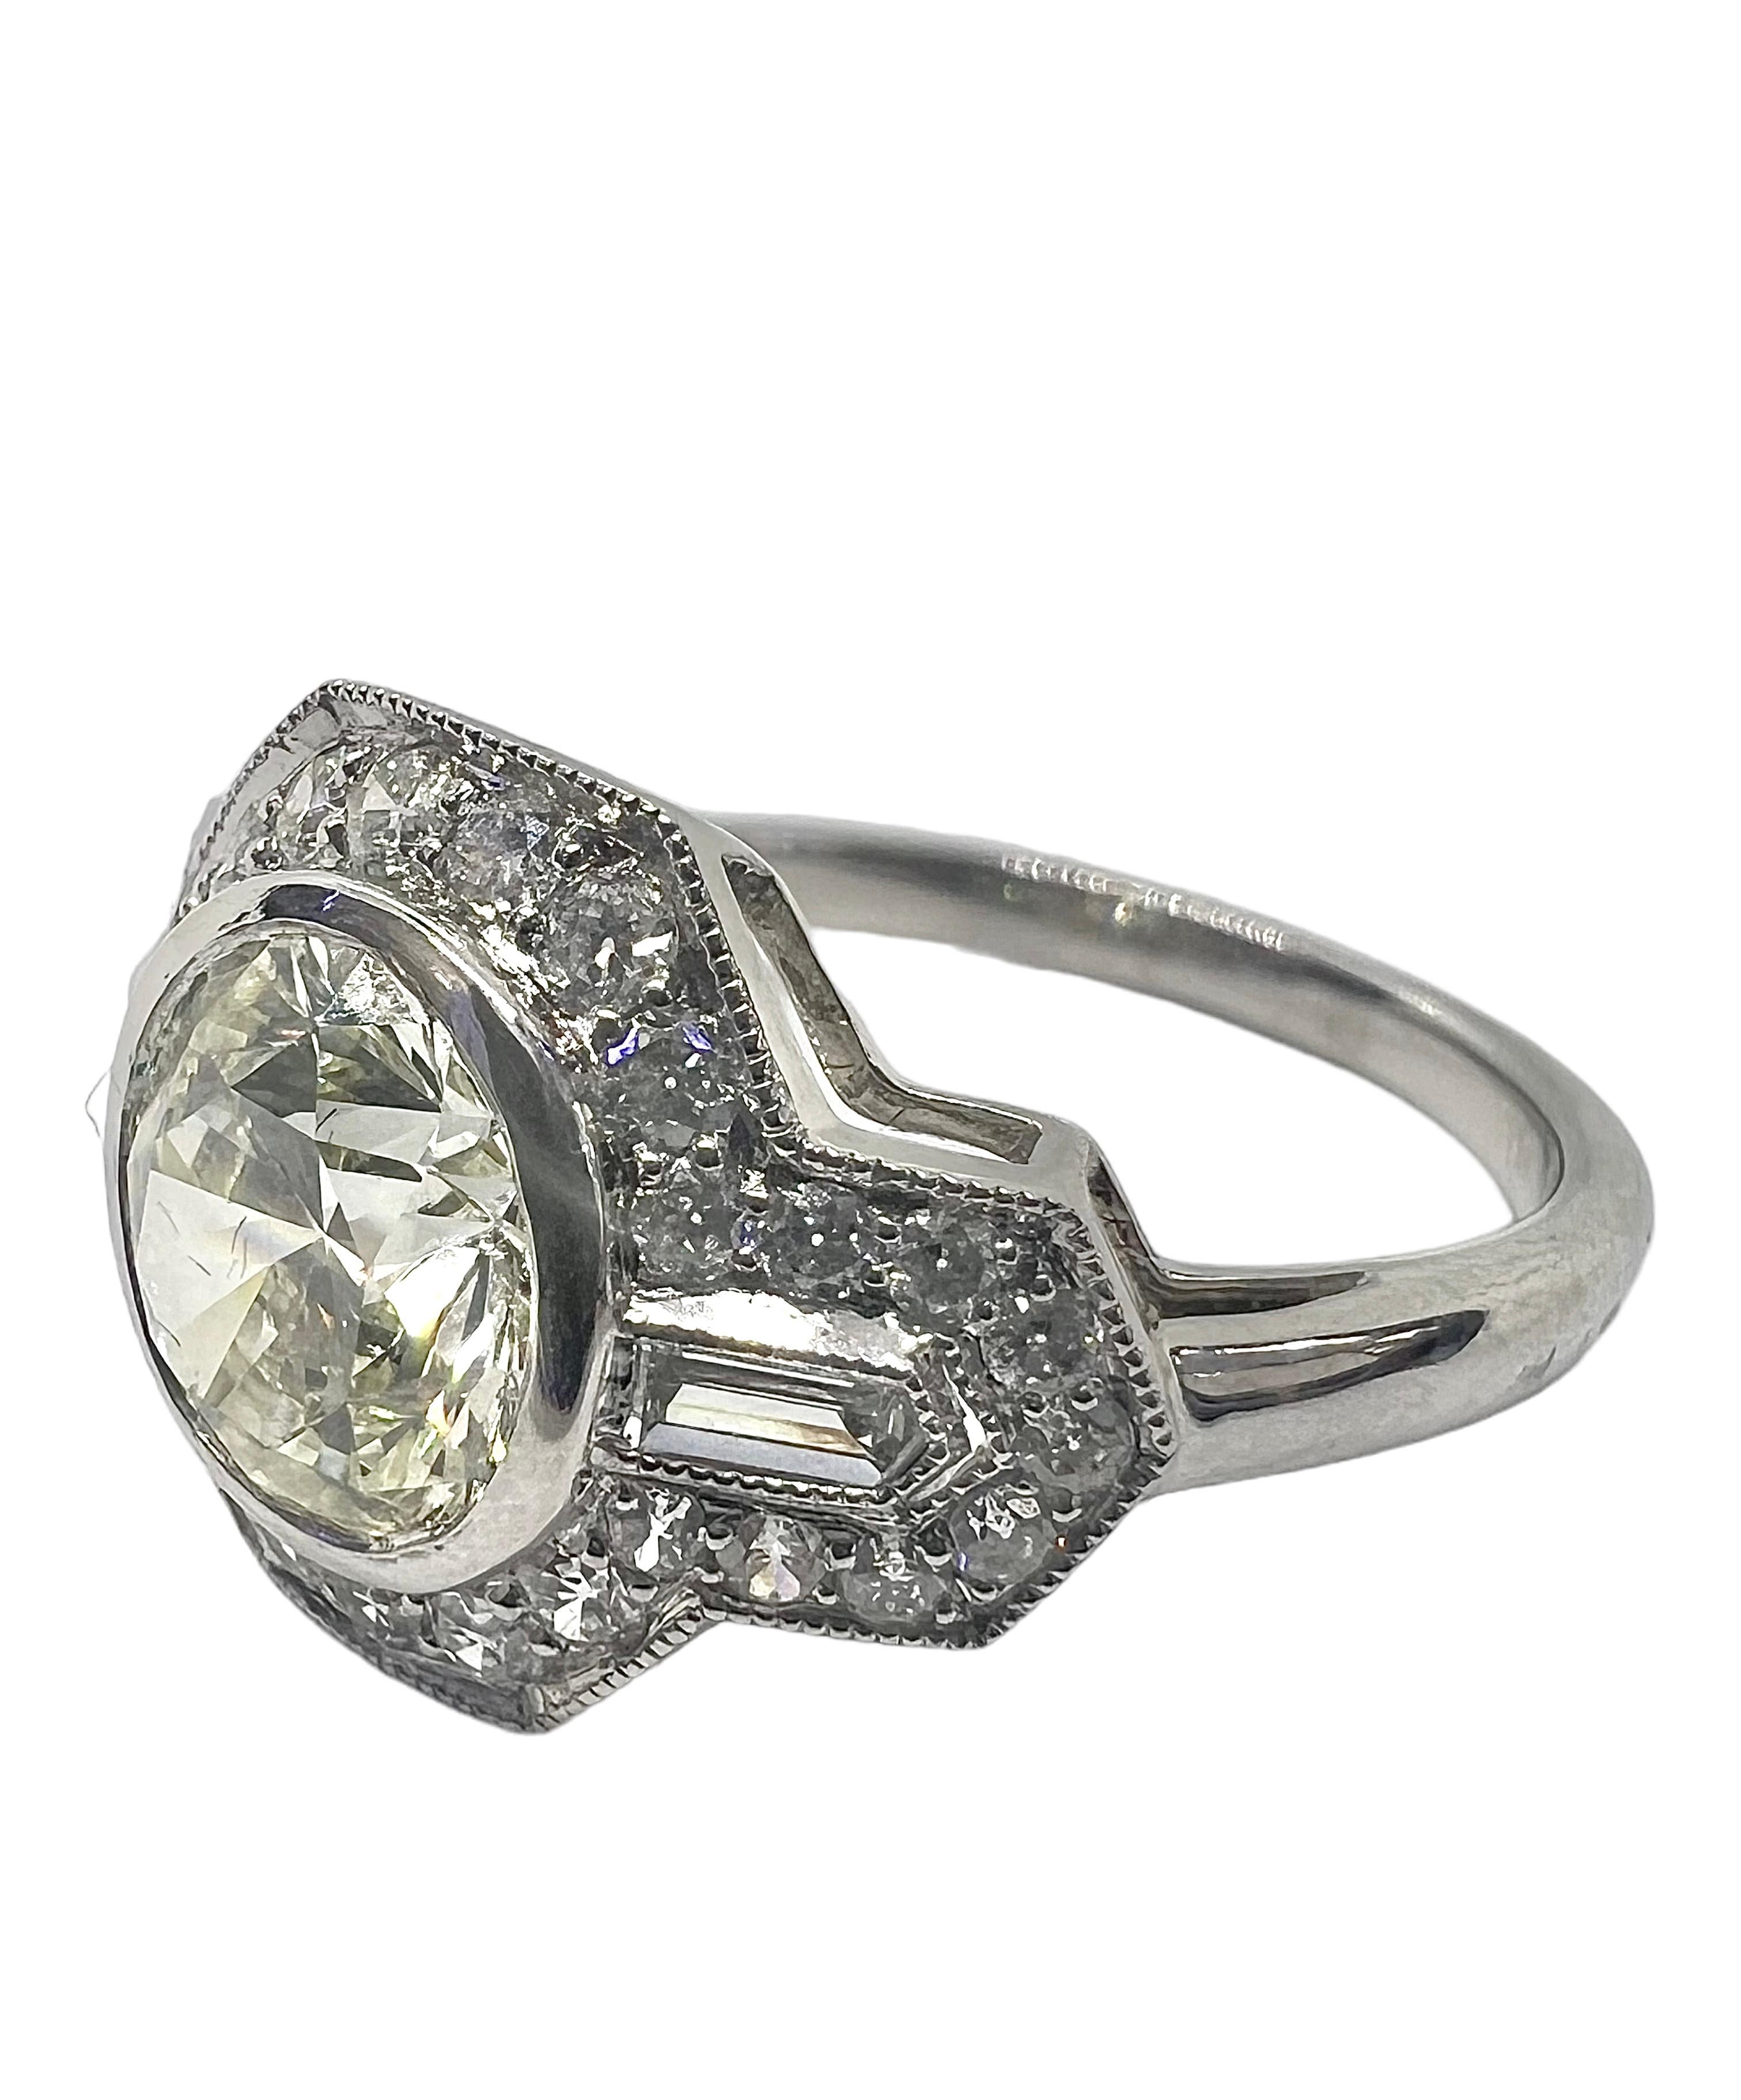 An art deco ring set in platinum with round diamond that weighs 1.51 carat surrounded with 0.50 carat small diamonds.

Sophia D by Joseph Dardashti LTD has been known worldwide for 35 years and are inspired by classic Art Deco design that merges